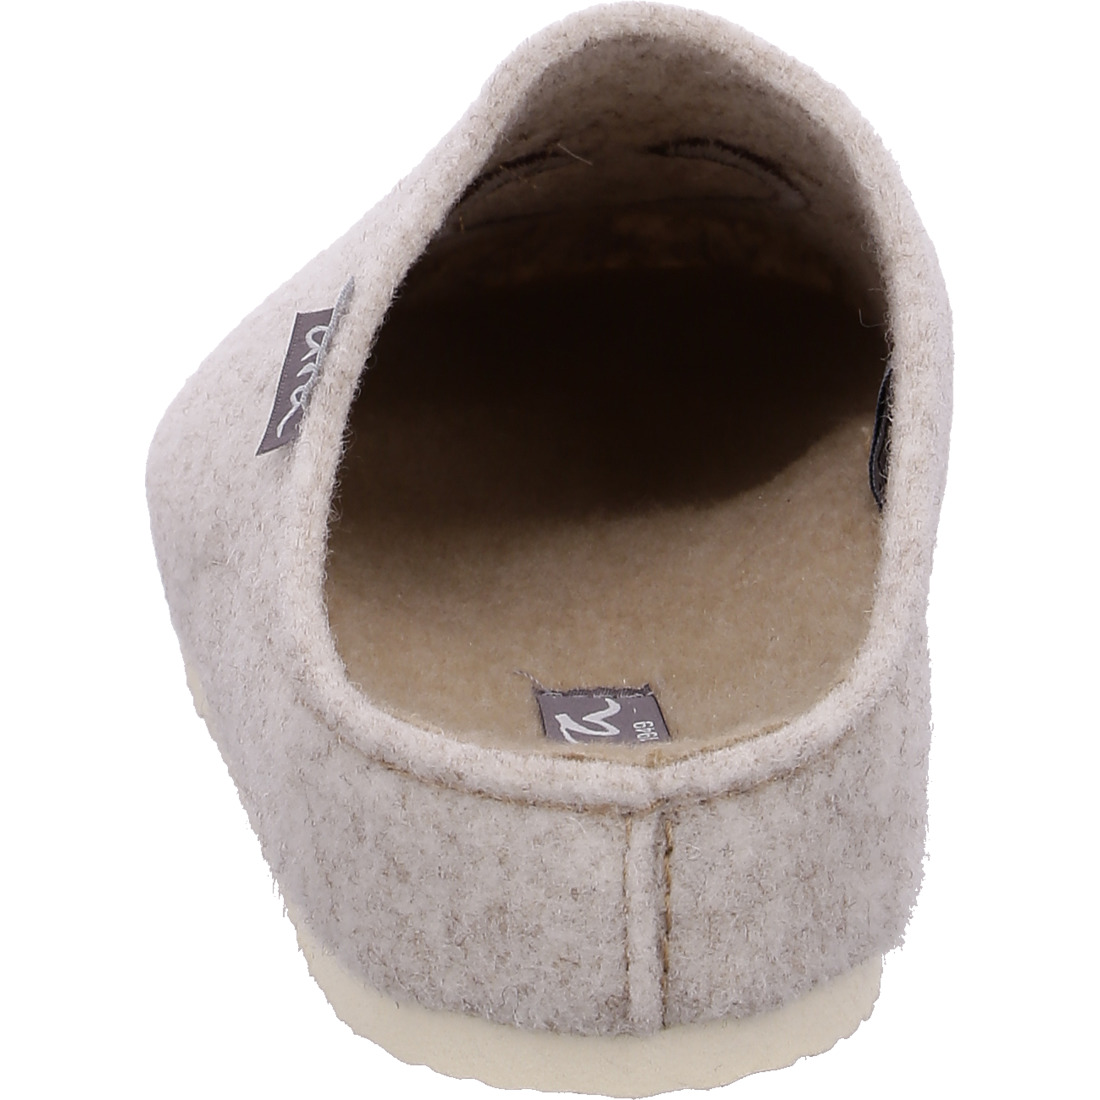 Chaussons*Ara Shoes Chaussons Chaussons Cosy creme